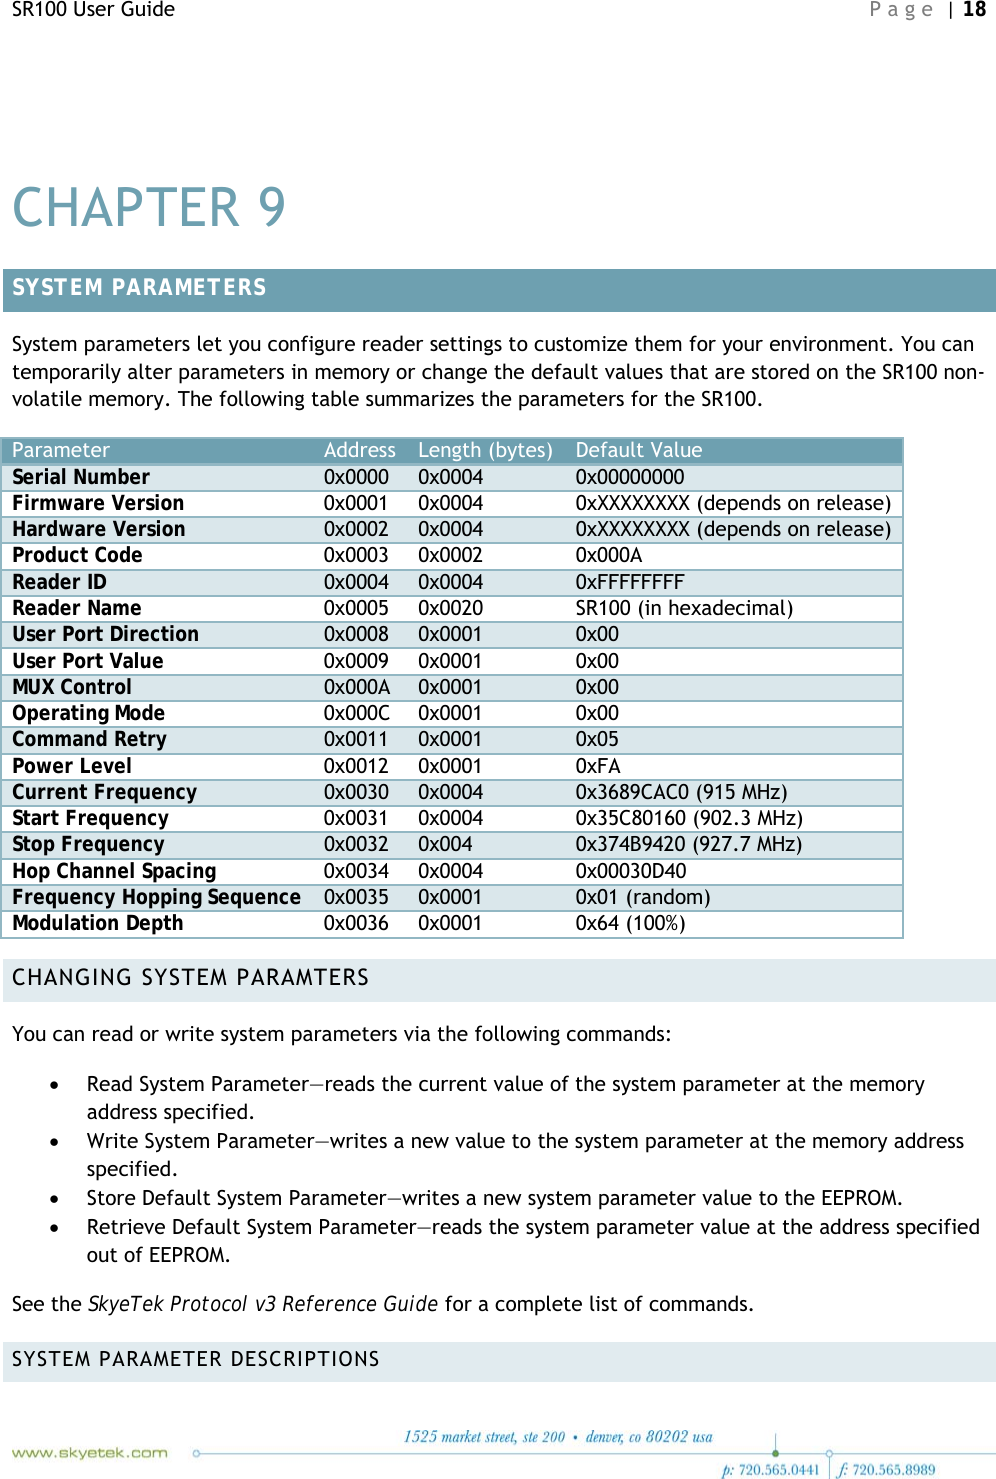 SR100 User Guide    Page | 18    CHAPTER 9 SYSTEM PARAMETERS System parameters let you configure reader settings to customize them for your environment. You can temporarily alter parameters in memory or change the default values that are stored on the SR100 non-volatile memory. The following table summarizes the parameters for the SR100. Parameter Address Length (bytes) Default Value Serial Number  0x0000 0x0004 0x00000000 Firmware Version  0x0001 0x0004 0xXXXXXXXX (depends on release) Hardware Version  0x0002 0x0004 0xXXXXXXXX (depends on release) Product Code  0x0003 0x0002 0x000A Reader ID  0x0004 0x0004 0xFFFFFFFF Reader Name  0x0005 0x0020 SR100 (in hexadecimal) User Port Direction  0x0008 0x0001 0x00 User Port Value  0x0009 0x0001 0x00 MUX Control  0x000A 0x0001 0x00 Operating Mode  0x000C 0x0001 0x00 Command Retry  0x0011 0x0001 0x05 Power Level  0x0012 0x0001 0xFA Current Frequency  0x0030 0x0004 0x3689CAC0 (915 MHz) Start Frequency  0x0031 0x0004 0x35C80160 (902.3 MHz) Stop Frequency  0x0032 0x004 0x374B9420 (927.7 MHz) Hop Channel Spacing  0x0034 0x0004 0x00030D40 Frequency Hopping Sequence  0x0035 0x0001 0x01 (random) Modulation Depth  0x0036 0x0001 0x64 (100%) CHANGING SYSTEM PARAMTERS You can read or write system parameters via the following commands: • Read System Parameter—reads the current value of the system parameter at the memory address specified. • Write System Parameter—writes a new value to the system parameter at the memory address specified. • Store Default System Parameter—writes a new system parameter value to the EEPROM. • Retrieve Default System Parameter—reads the system parameter value at the address specified out of EEPROM. See the SkyeTek Protocol v3 Reference Guide for a complete list of commands. SYSTEM PARAMETER DESCRIPTIONS 